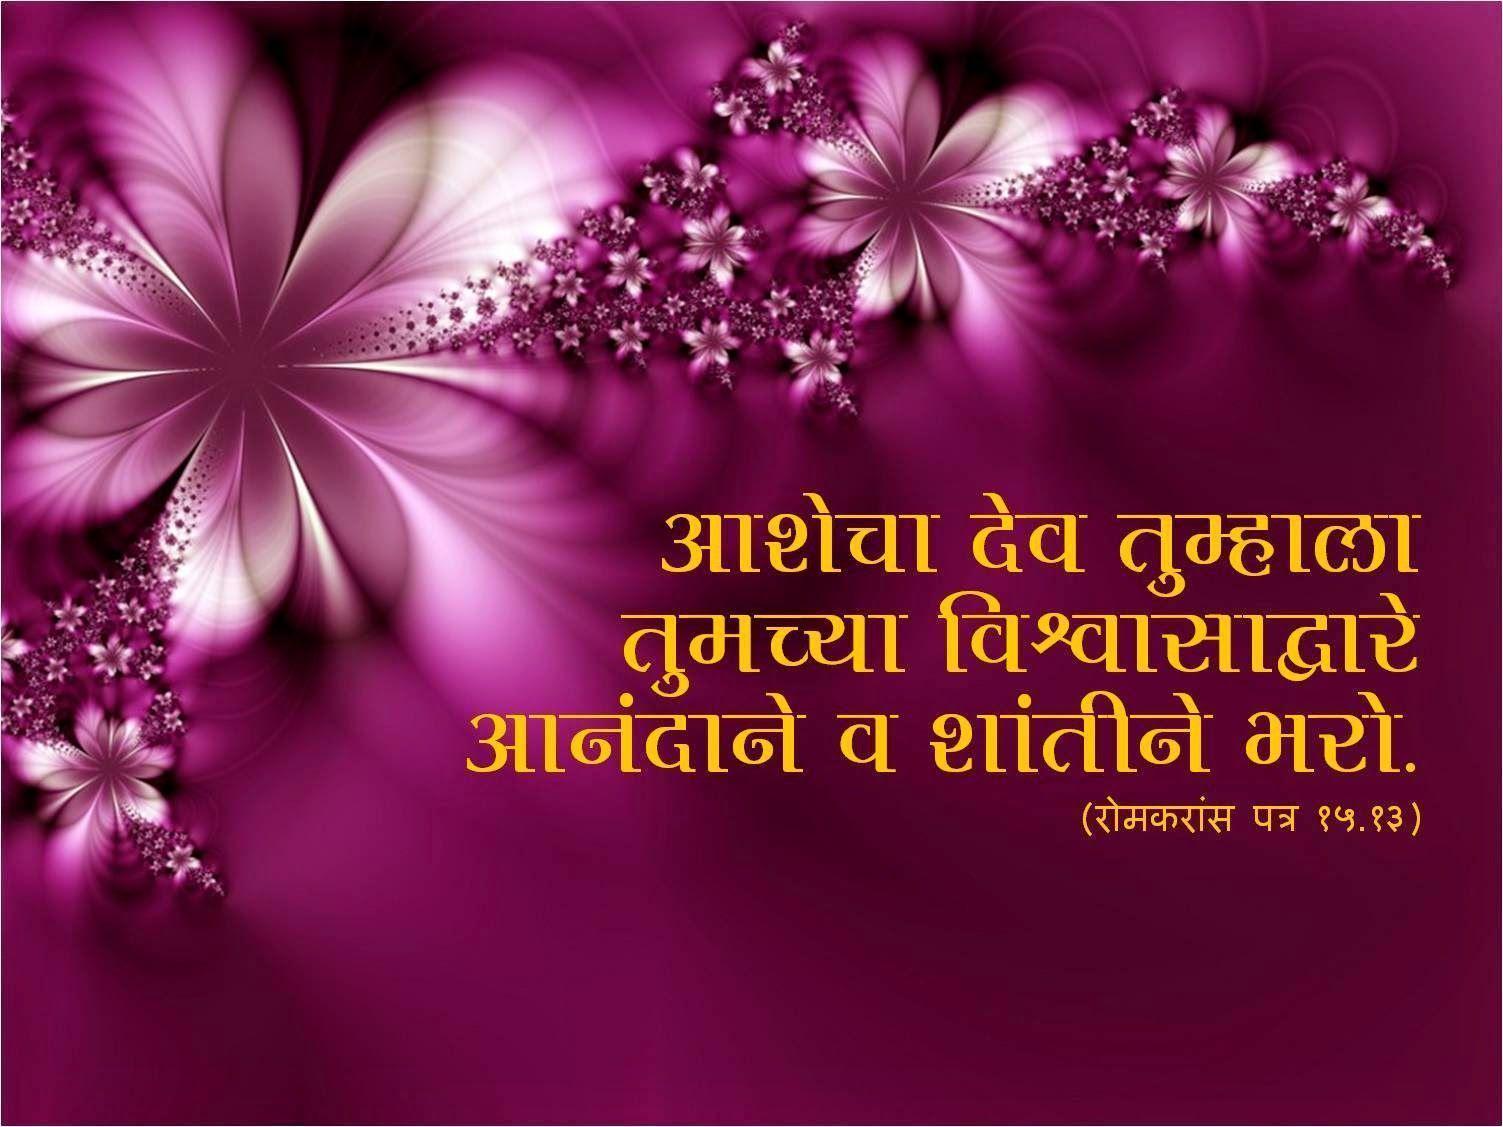 Bible Quotes Marathi, HD Wallpaper for Merry Christmas. Wish